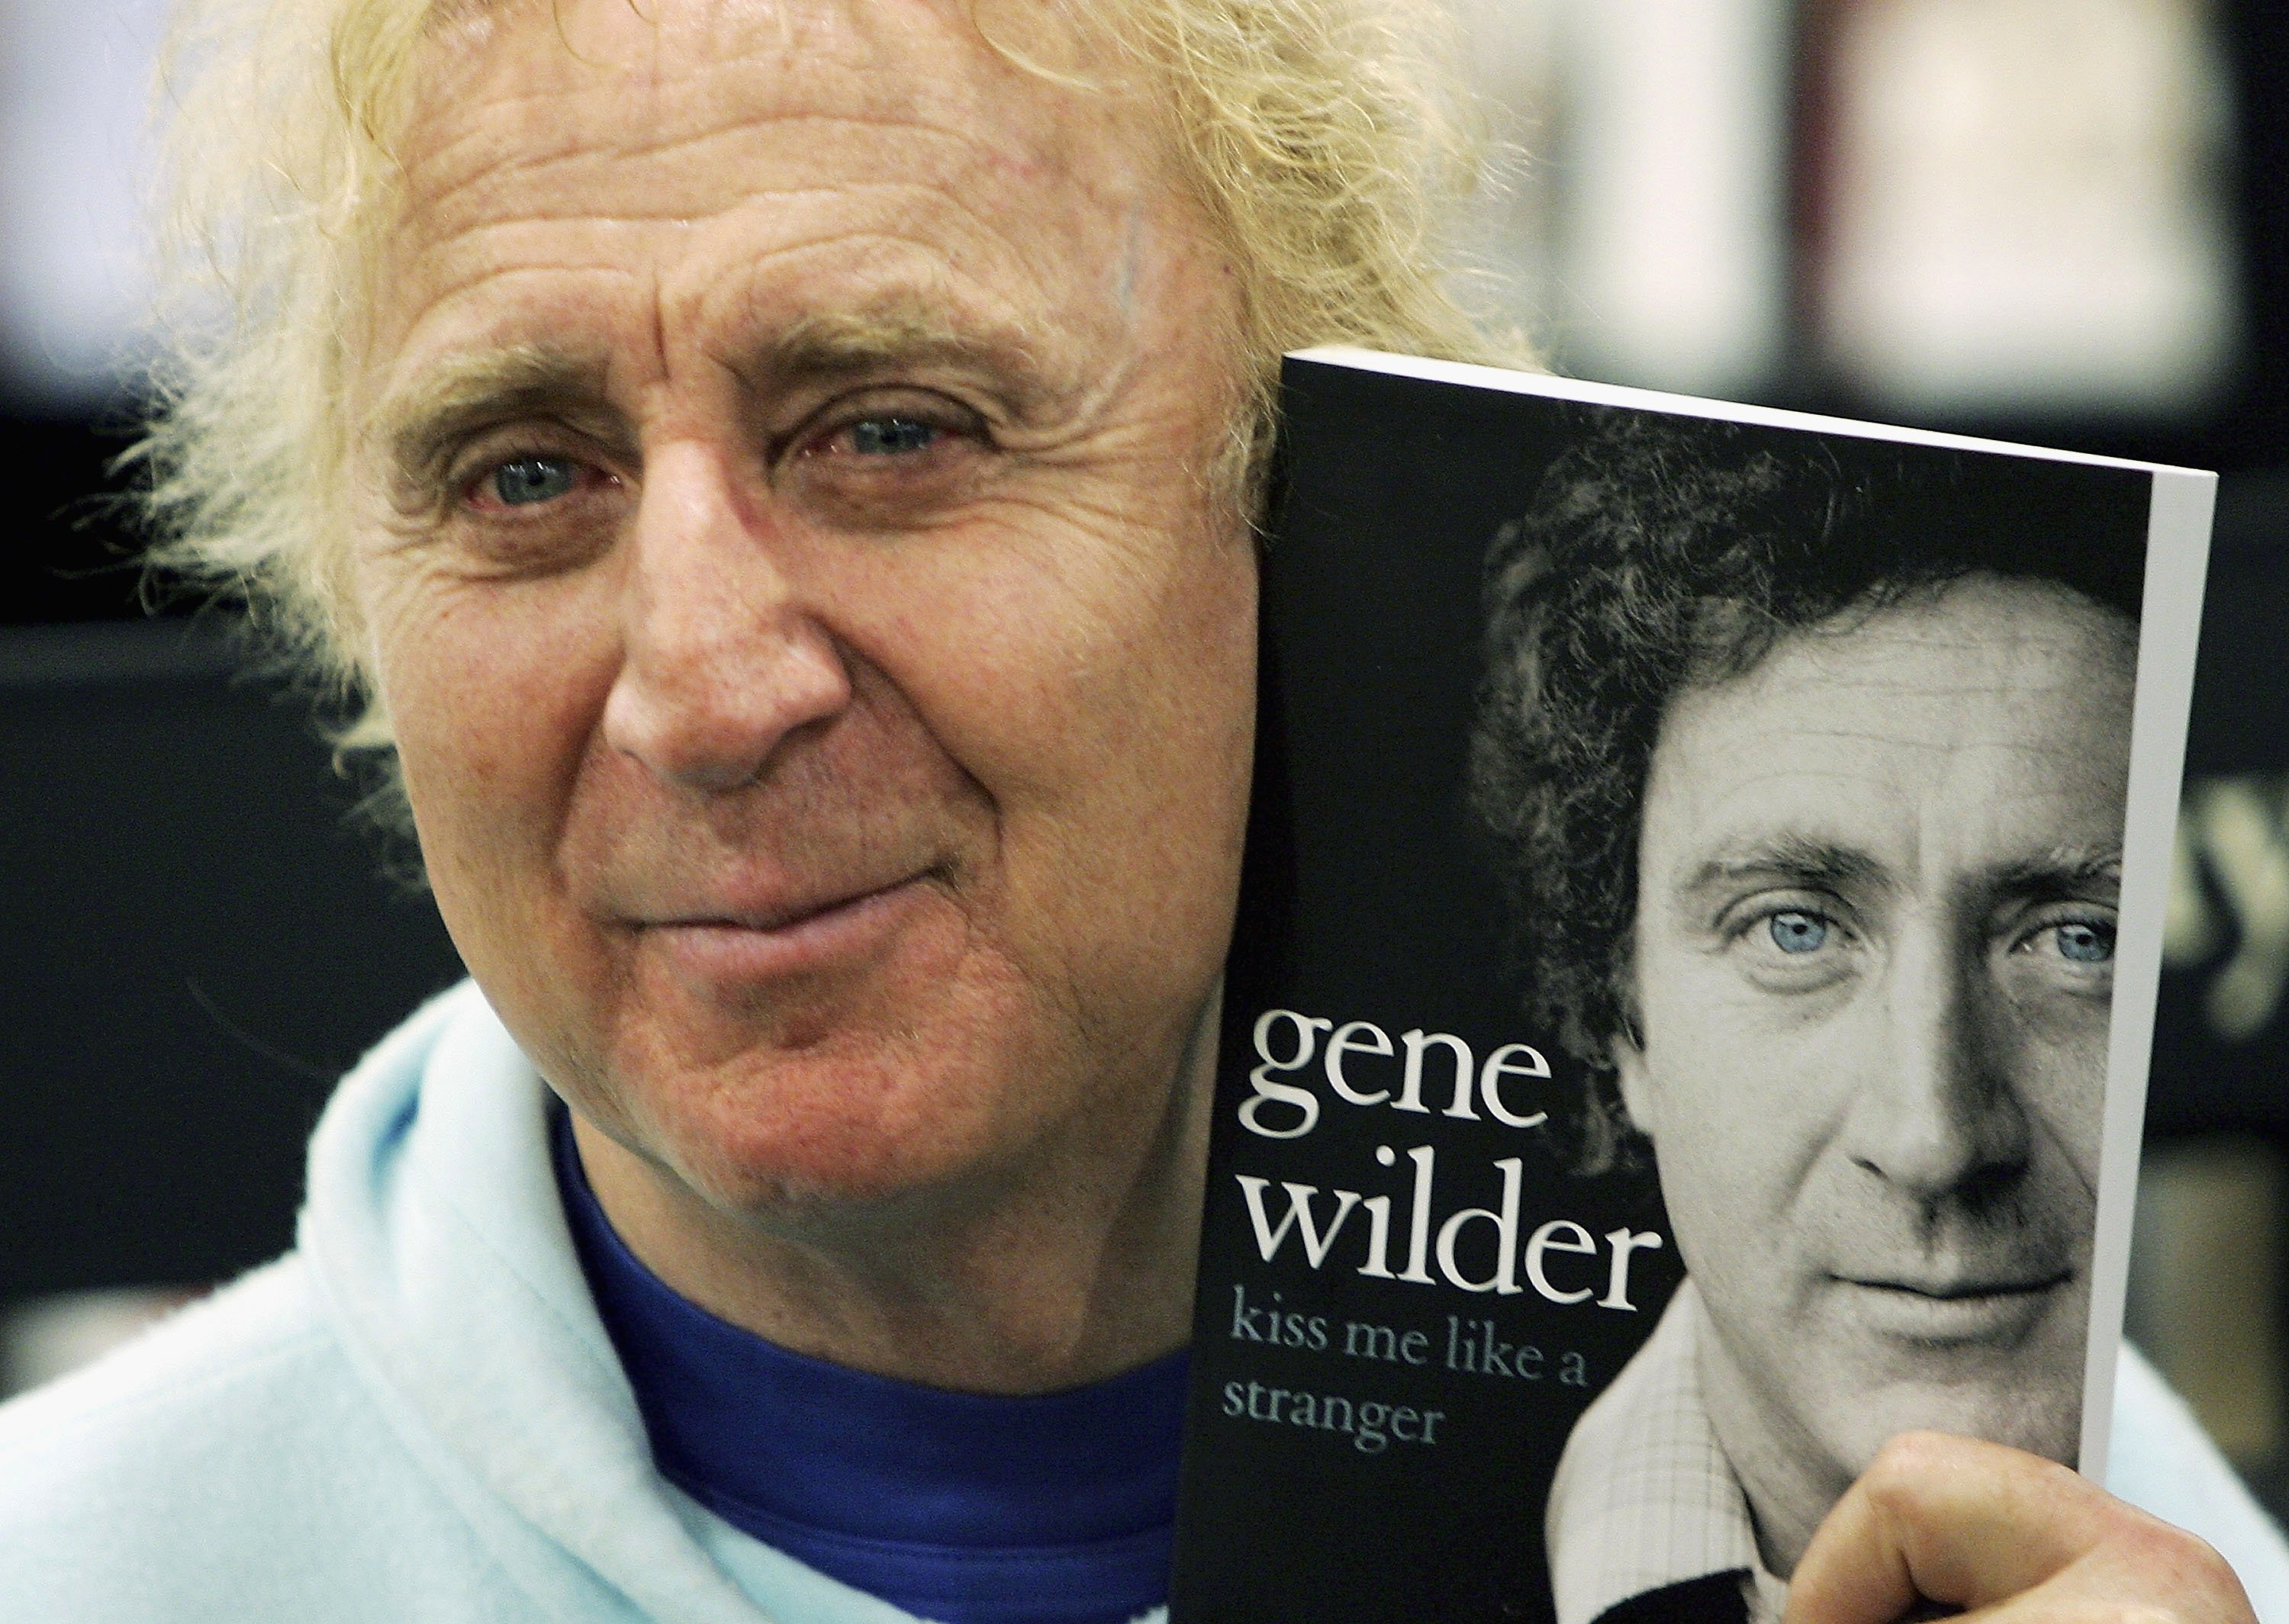 Gene Wilder poses with his memoir "Kiss Me Like A Stranger" at Waterstones Bookshop on June 7, 2005, in London, England. | Source: Getty Images